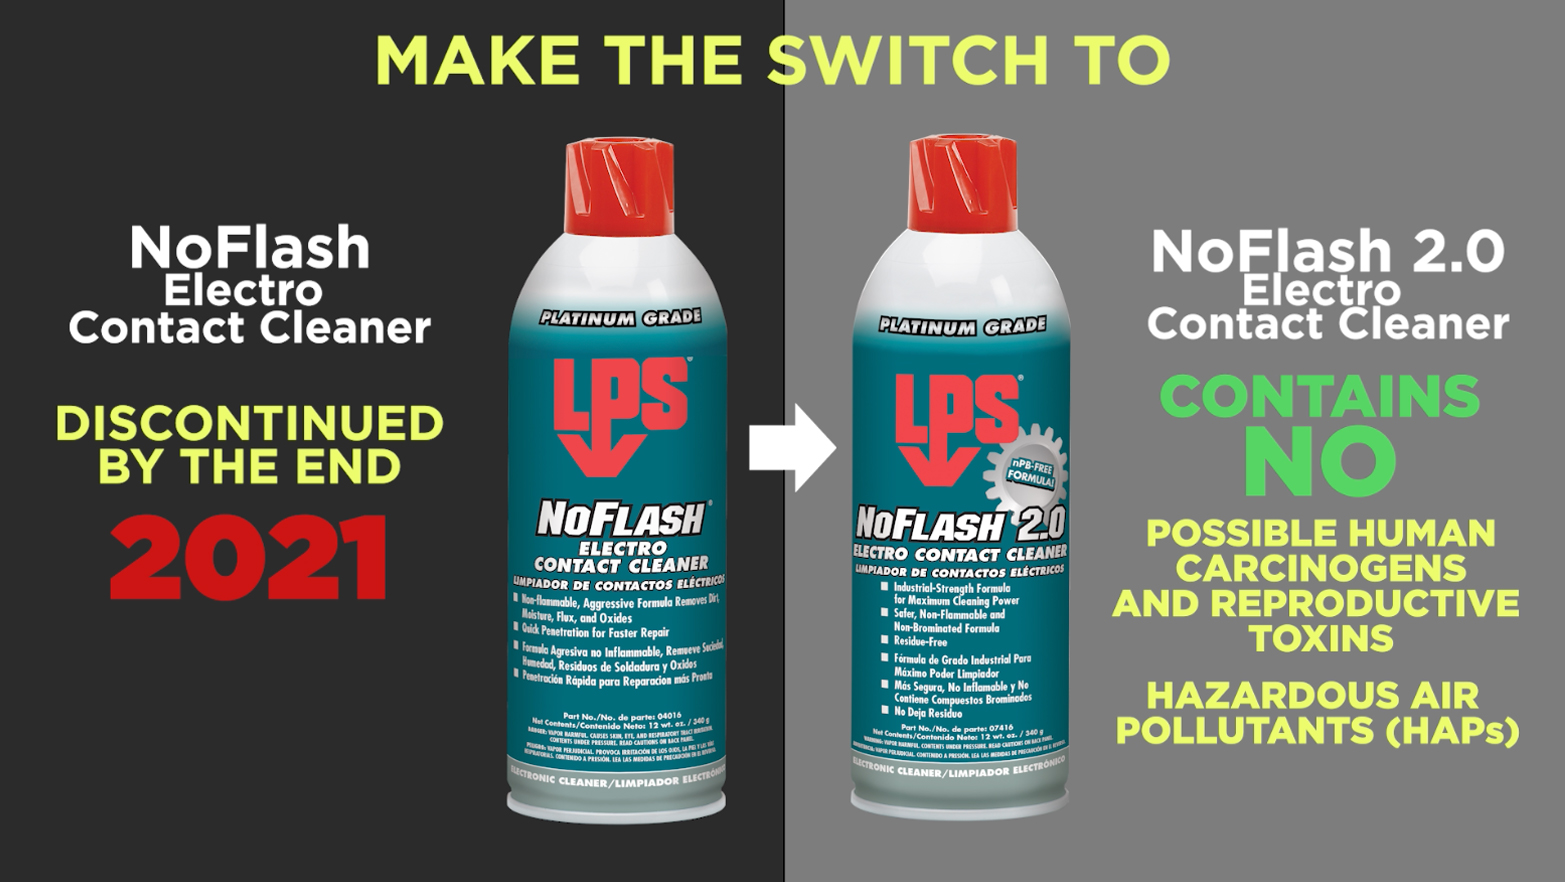 Convert to nPB free NoFlash 2.0 Electro Contact Cleaner